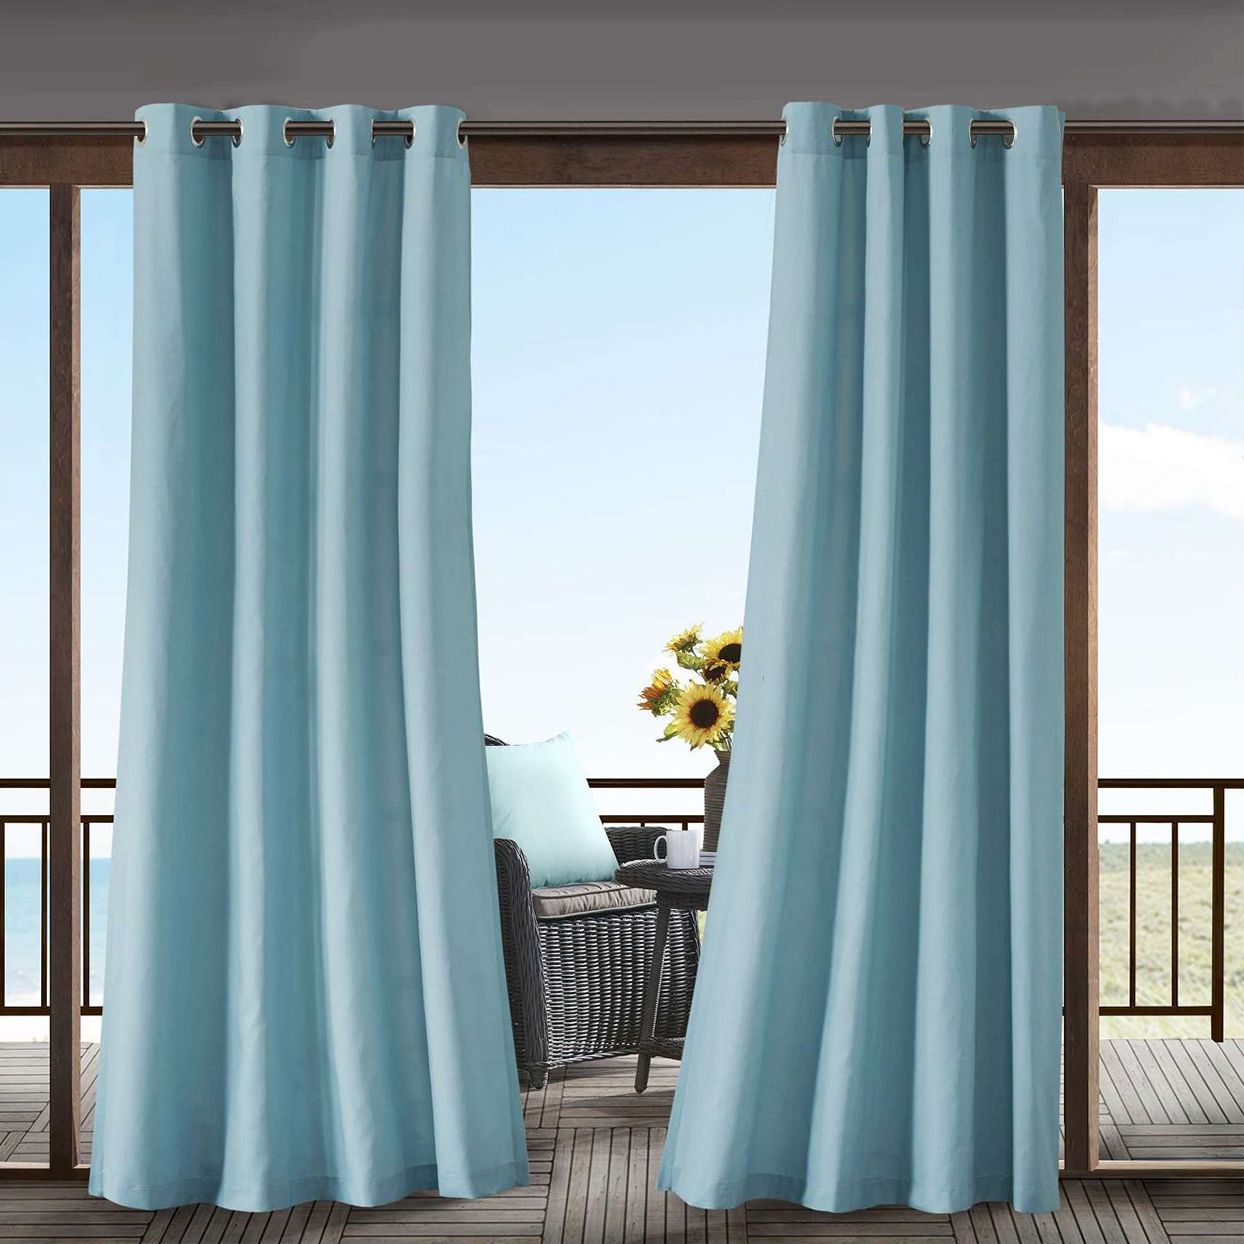 The 7 Best Outdoor Curtains to Transform Your Space into a Private ...